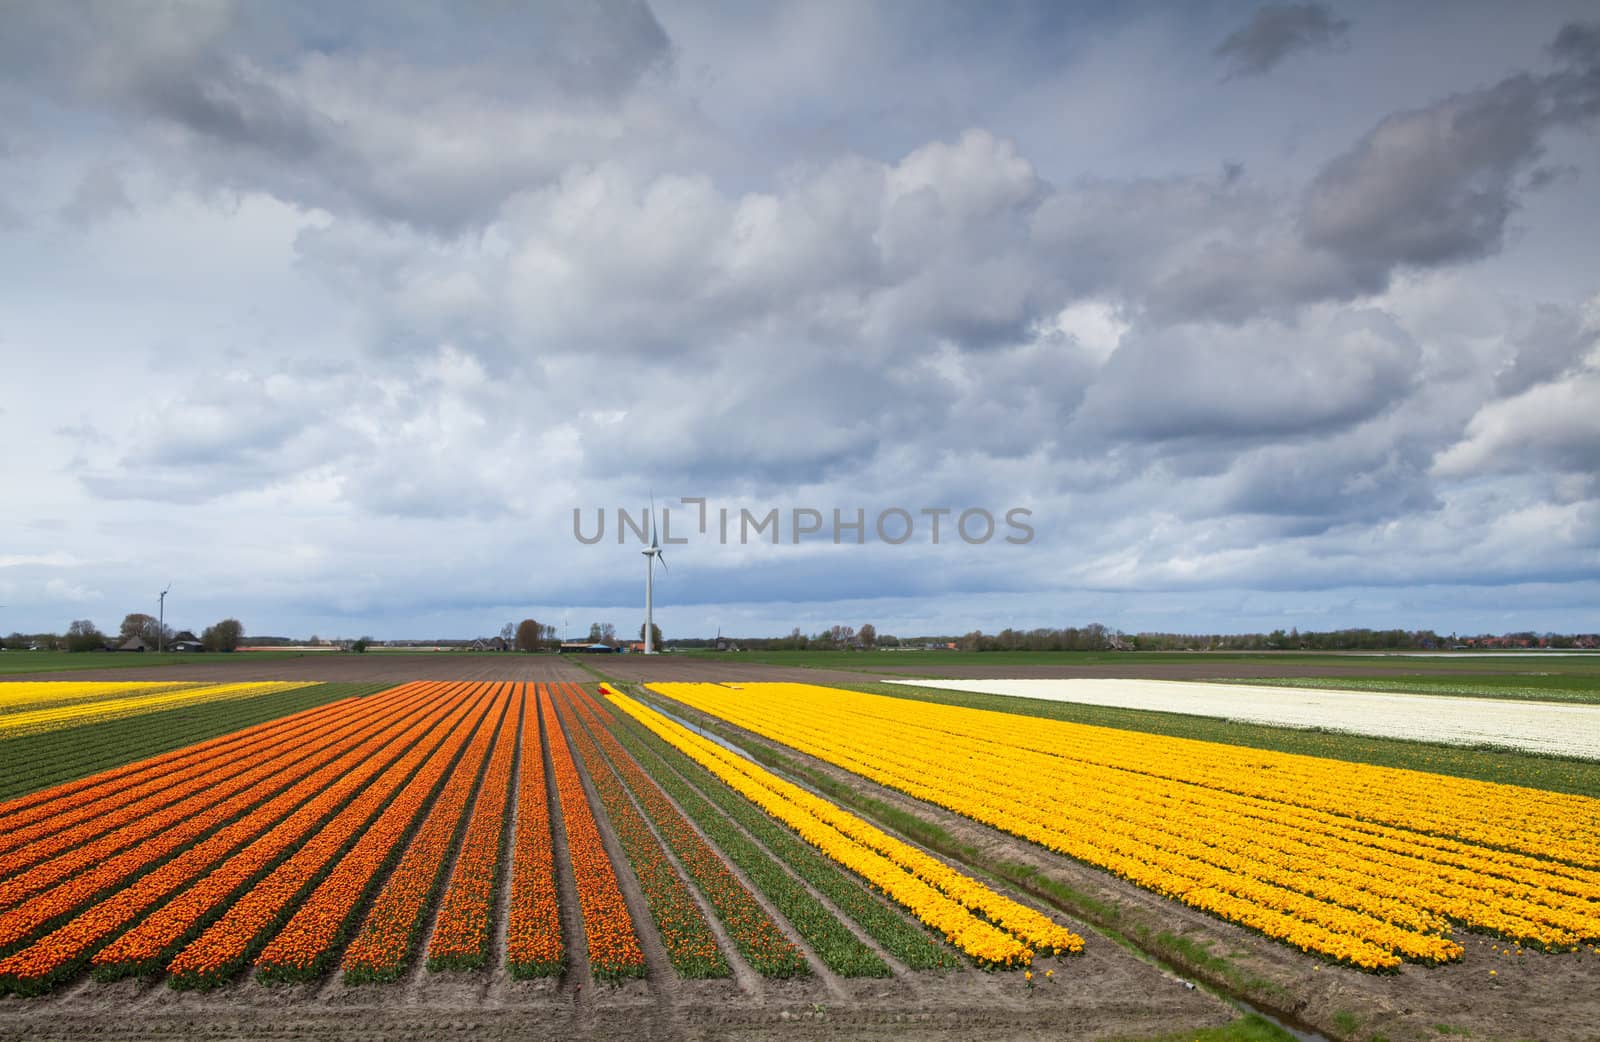 big fields with prange and yellow tulips, nice clouded sky and windmill